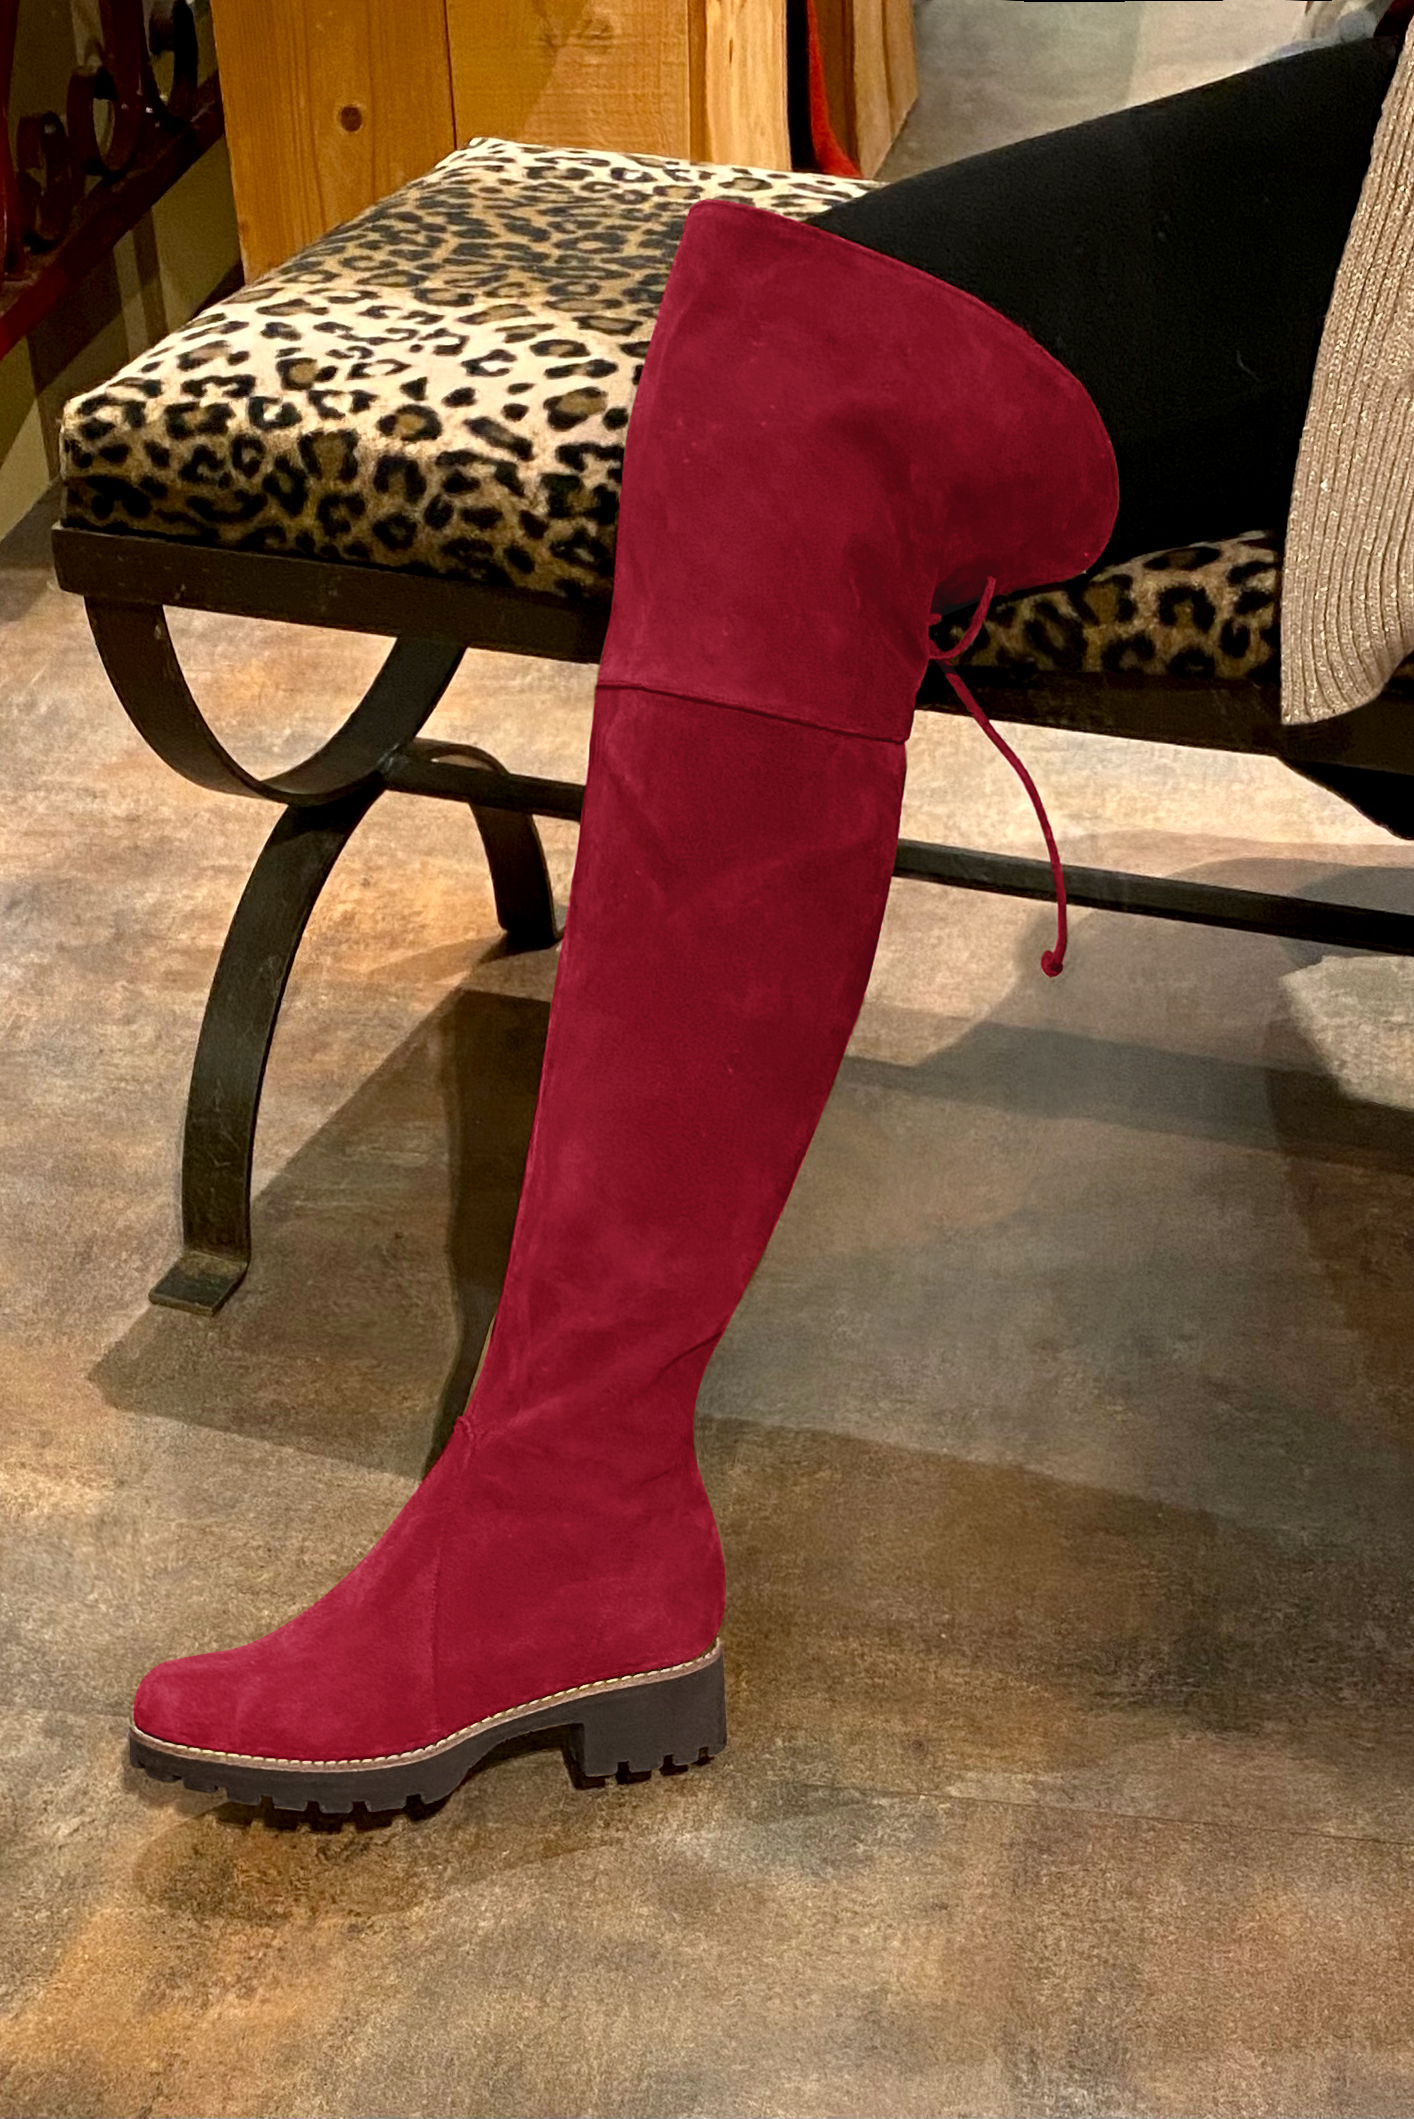 Cardinal red women's leather thigh-high boots. Round toe. Low rubber soles. Made to measure. Worn view - Florence KOOIJMAN